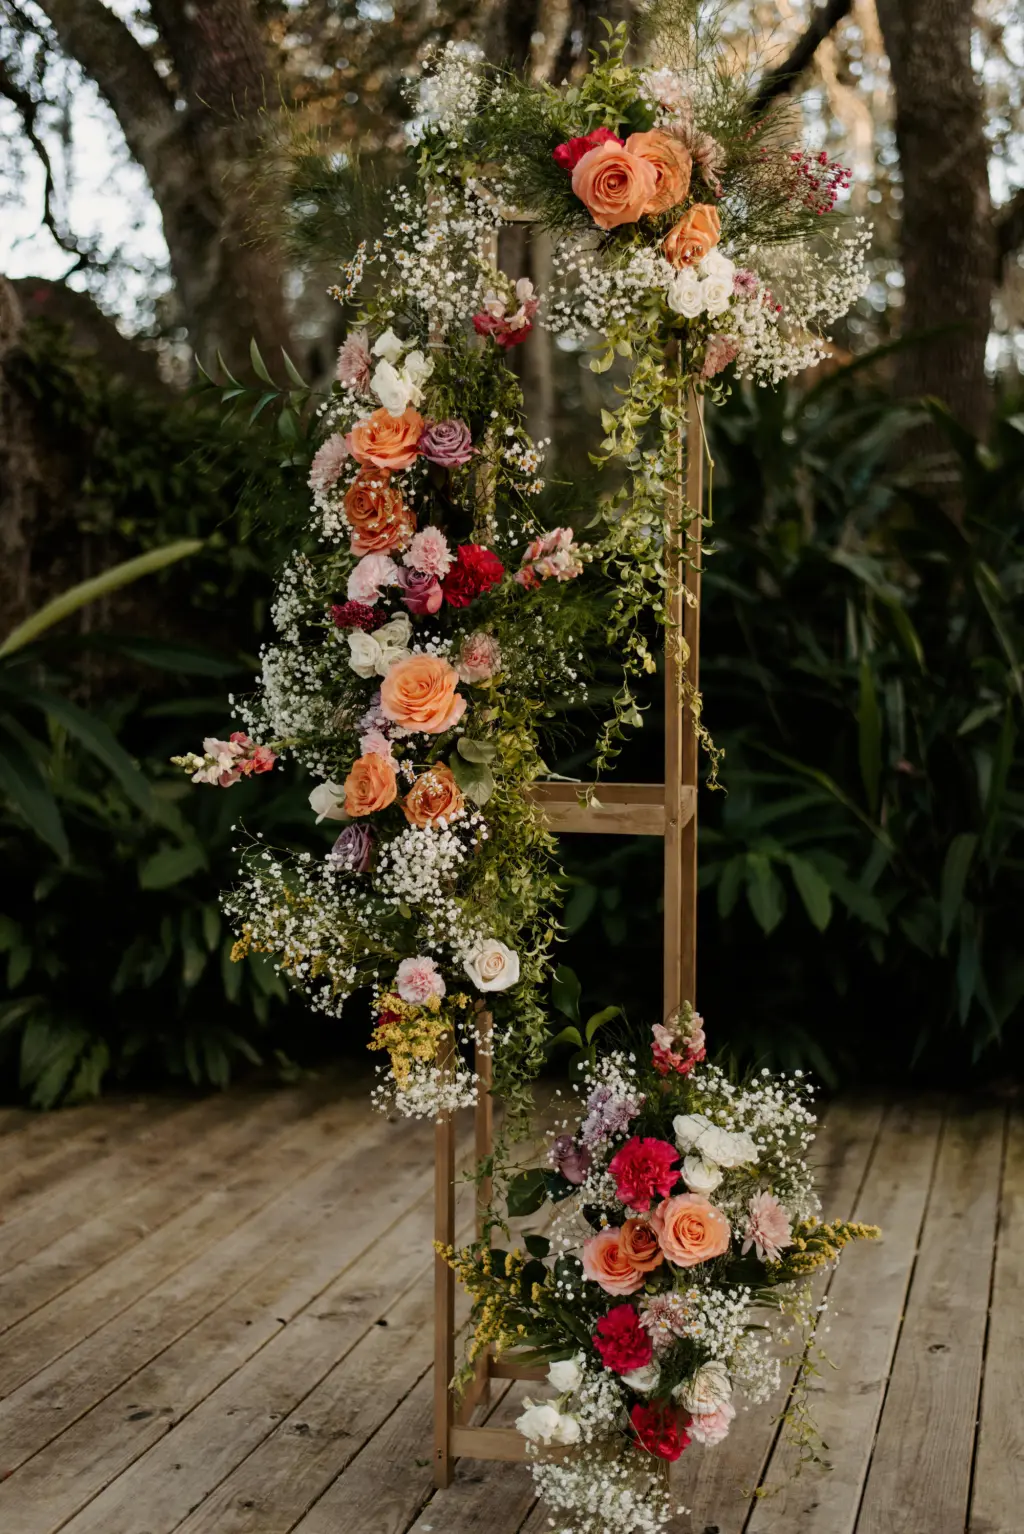 Gold Stand Holding Orange, Red and Pink Florals as Arch Wedding Ceremony Decor in Garden Inspired Wedding